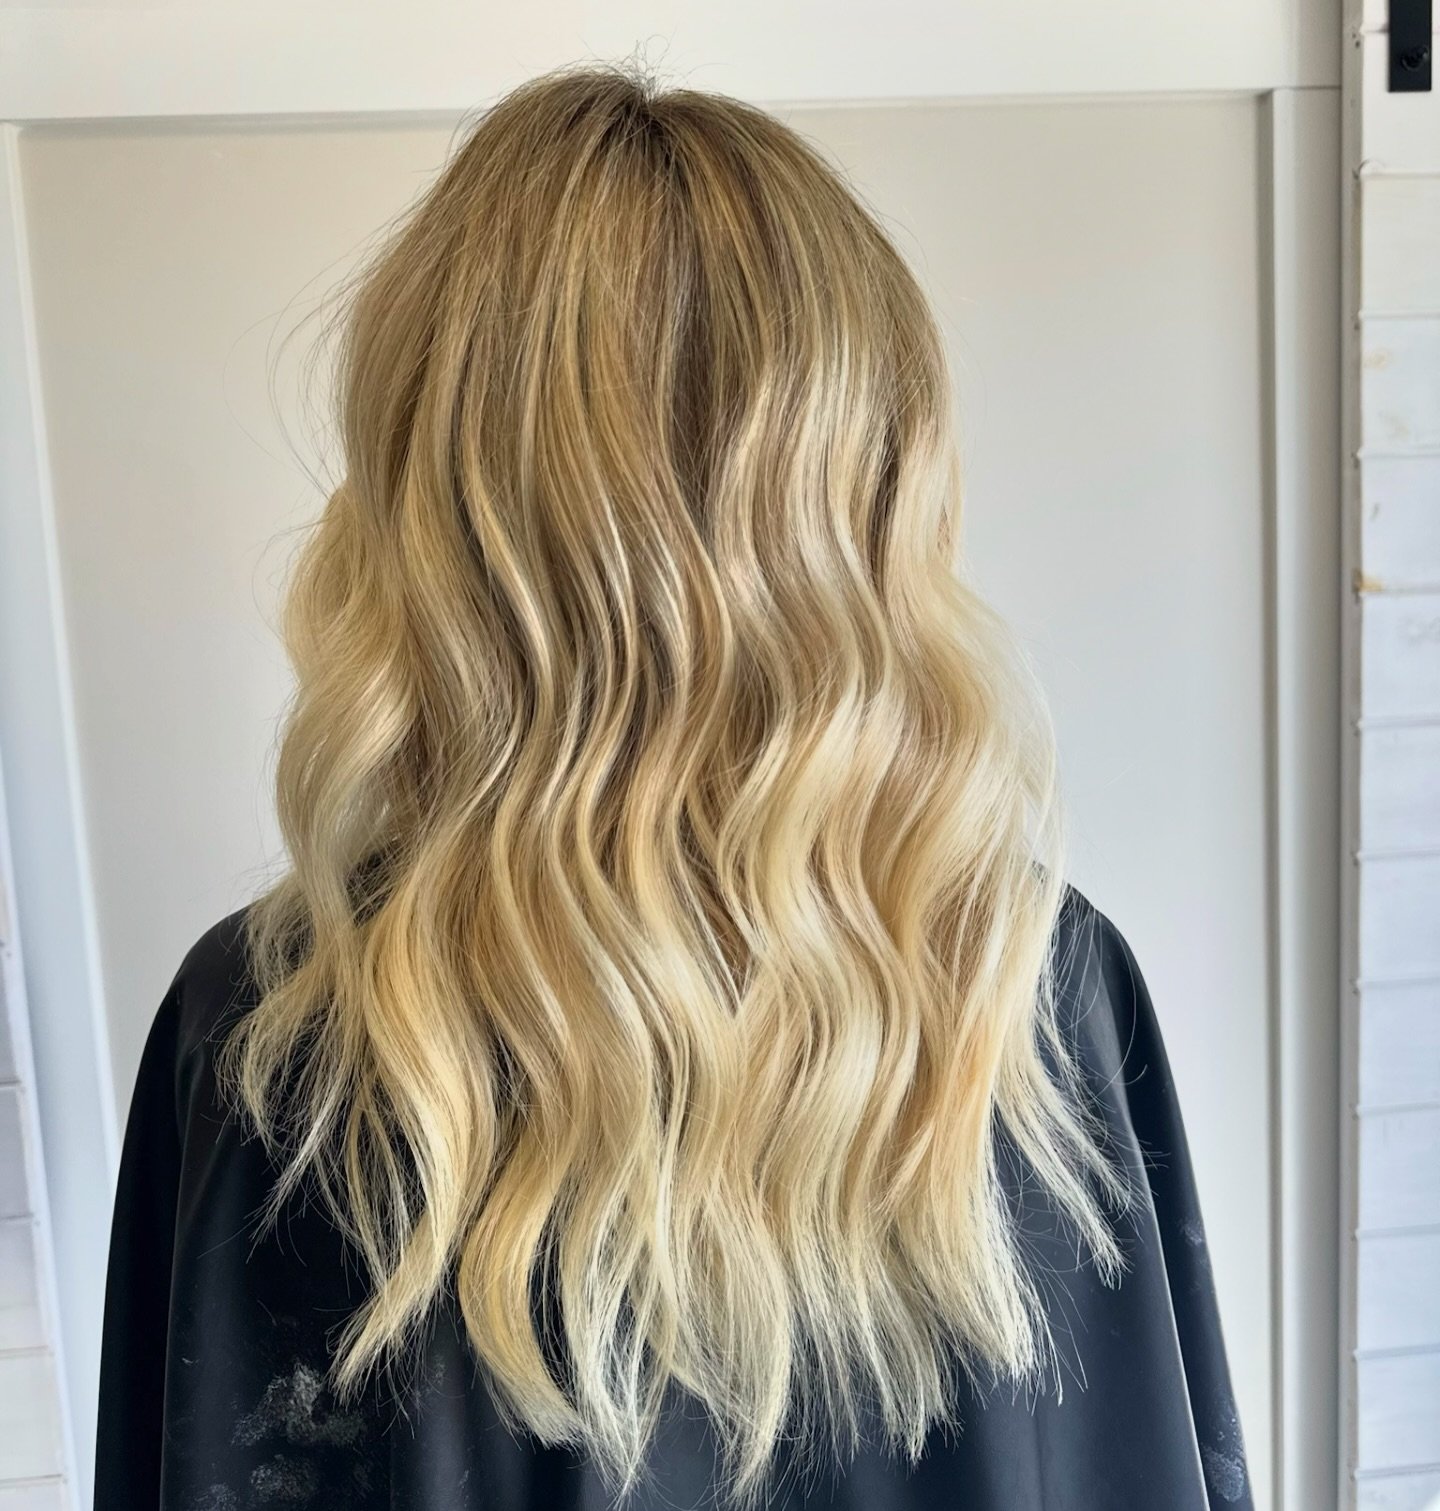 As soon as the sun comes shining we are ready for the blonde in life ✨

Appointments available this coming week and we are ready for you 🤟

Hair by @hairby.lexia